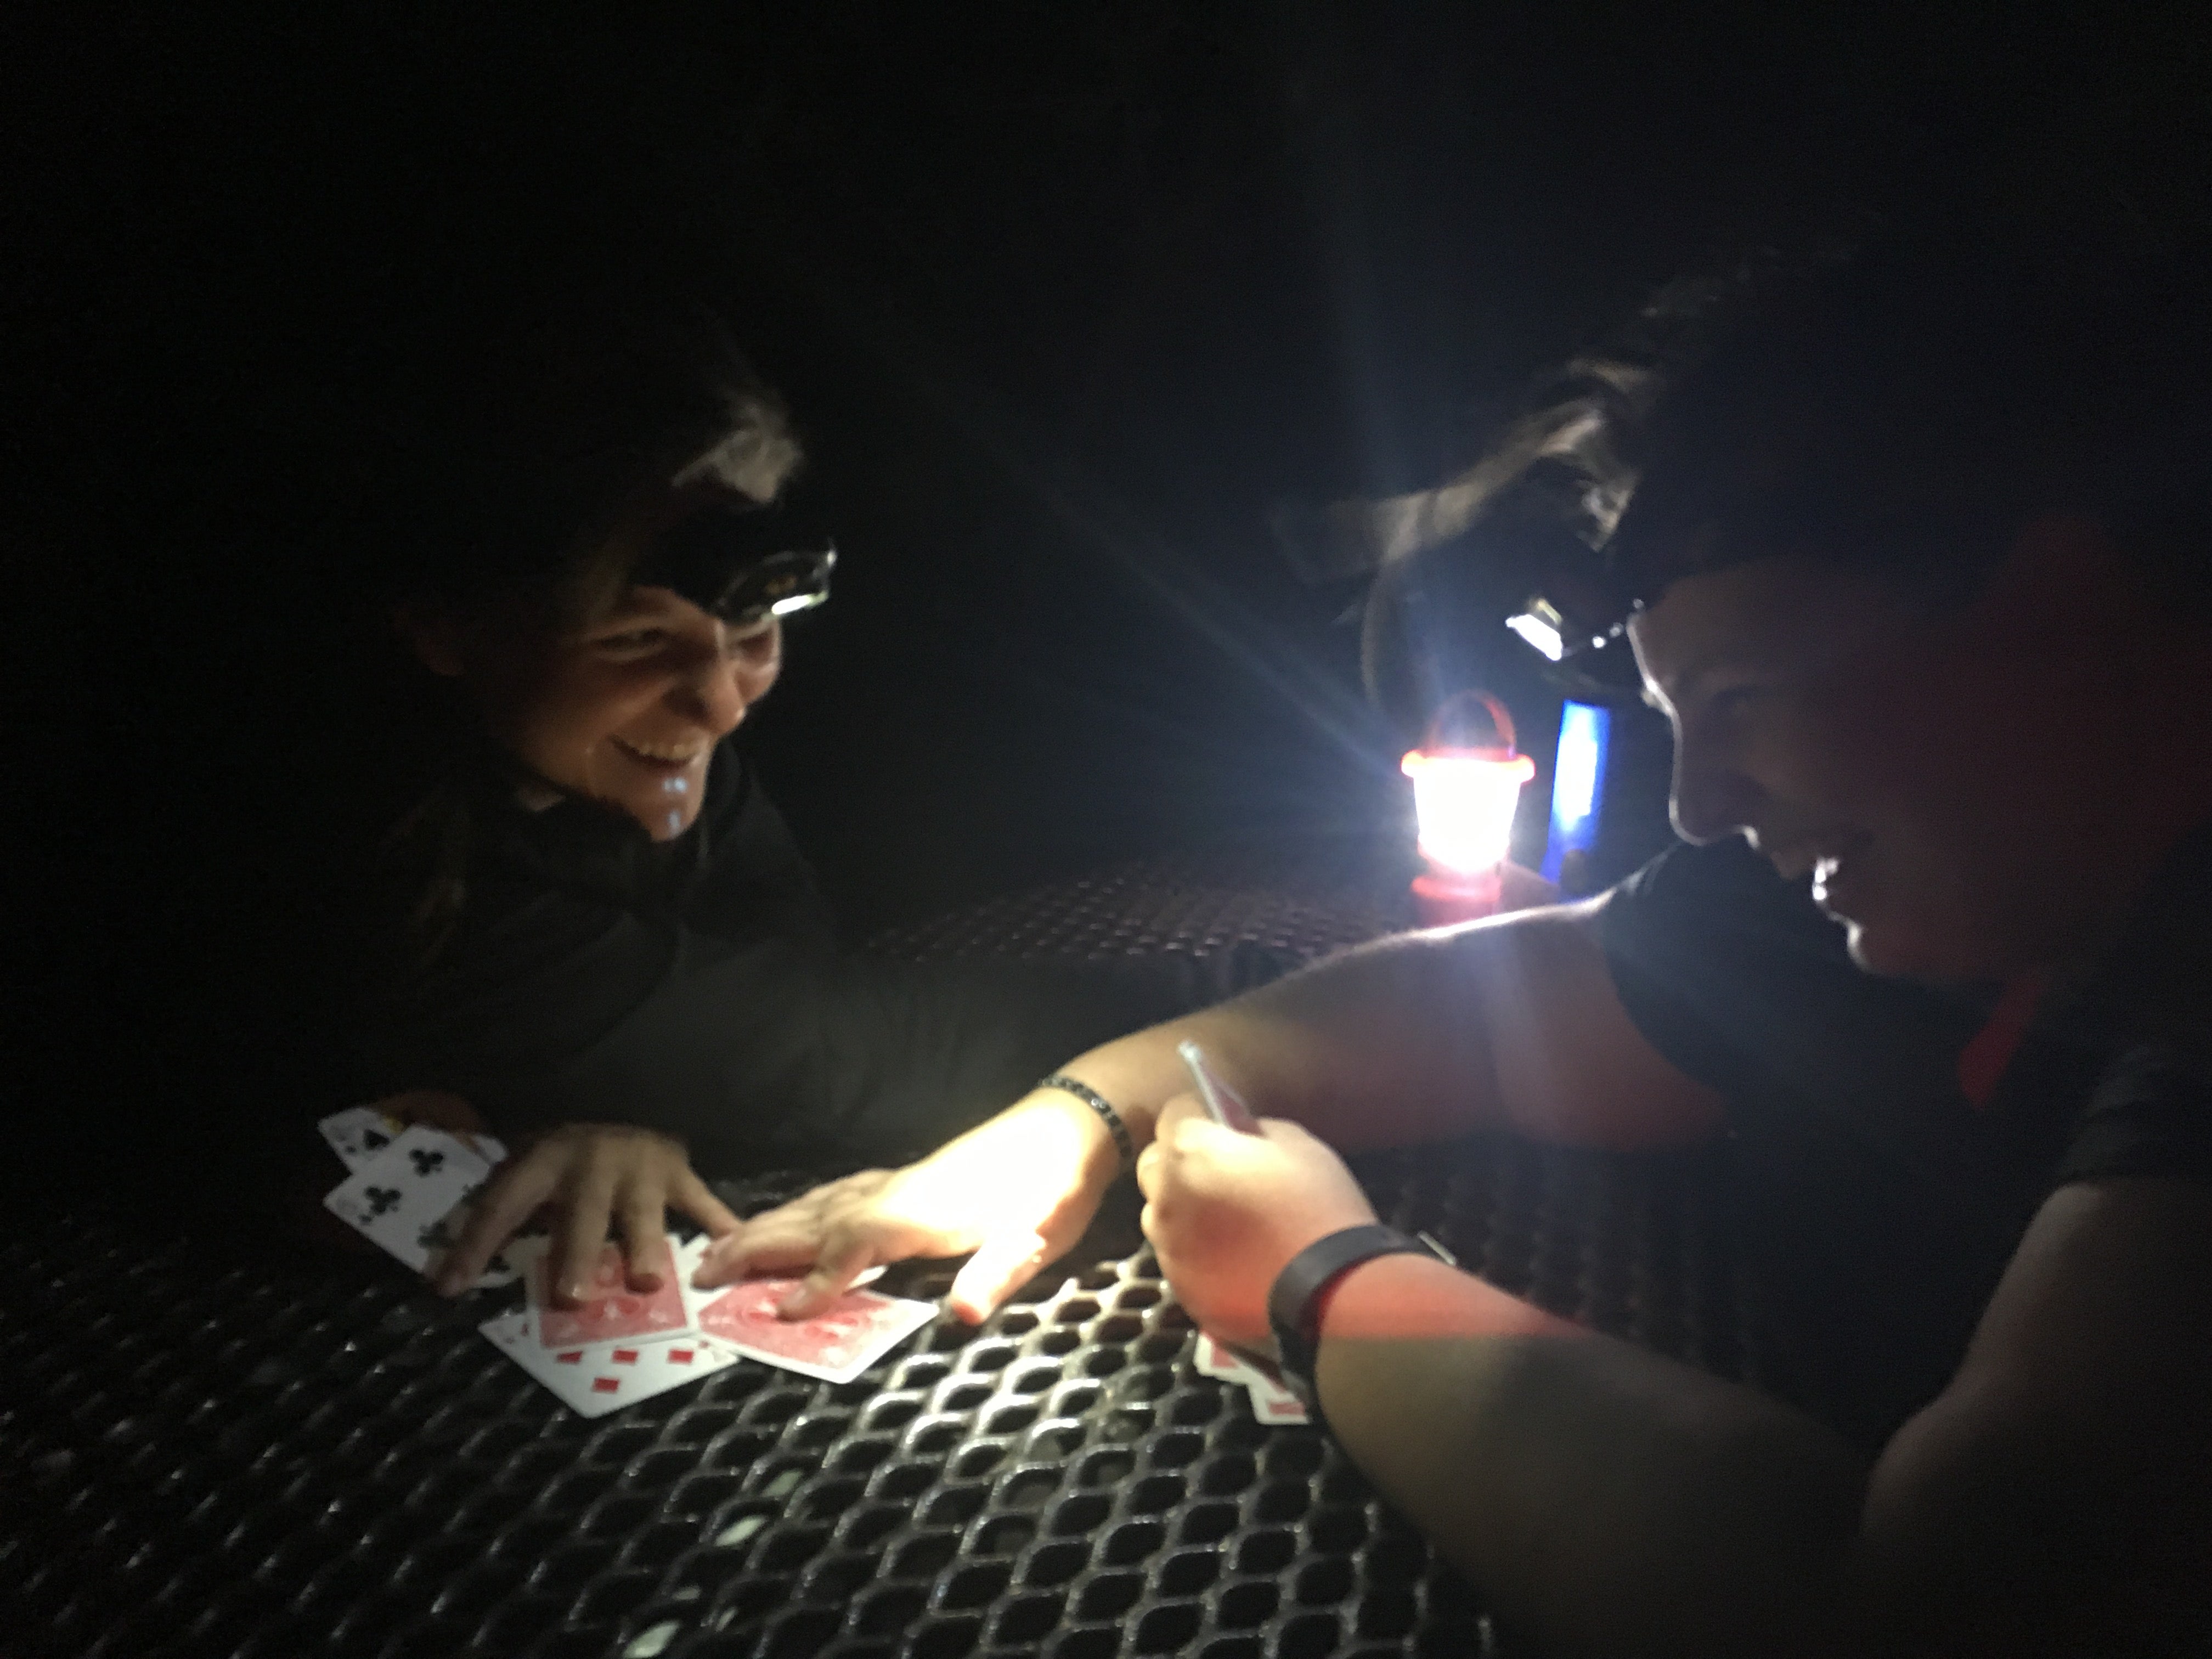 Headlamps and cards are always encouraged.